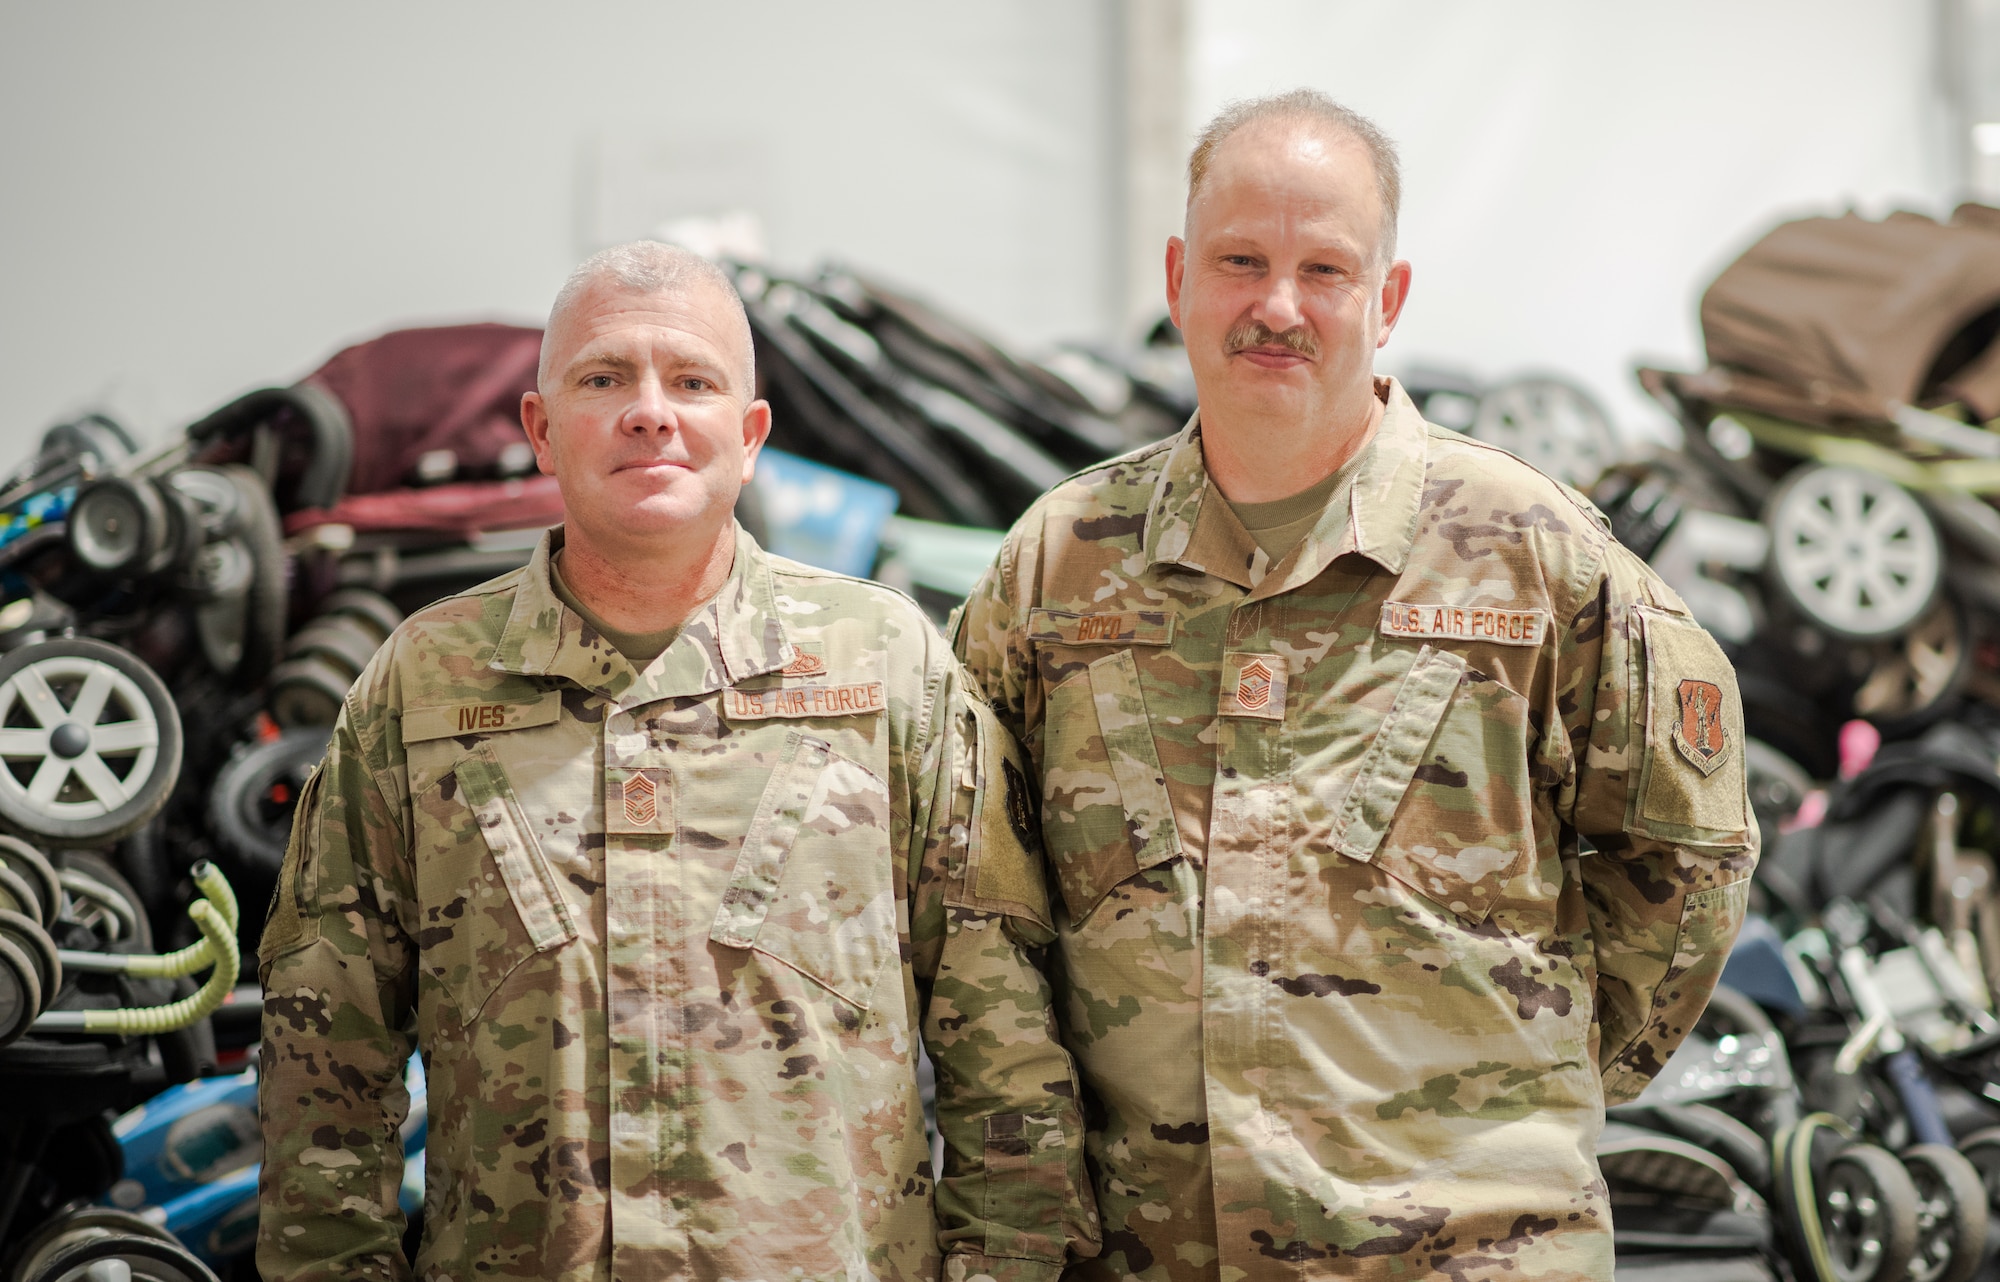 U.S. Air Force Chief Master Sgt. Marvin Boyd, Washington Air National Guard Command Chief, and Chief Master Sgt. Brandon Ives, 141st Air Refueling Wing command chief, pose for a photo in front of a large donation of strollers at Liberty Village, Joint Base McGuire-Dix-Lakehurst, New Jersey, Sept. 27, 2021. Boyd handed over the senior enlisted leader of Village Three position to Ives. The Department of Defense, through U.S. Northern Command, and in support of the Department of Homeland Security, is providing transportation, temporary housing, medical screening, and general support for at least 50,000 Afghan evacuees at suitable facilities, in permanent or temporary structures, as quickly as possible. This initiative provides Afghan personnel essential support at secure locations outside Afghanistan. (U.S. Air Force photo by Capt. Francine St Laurent)